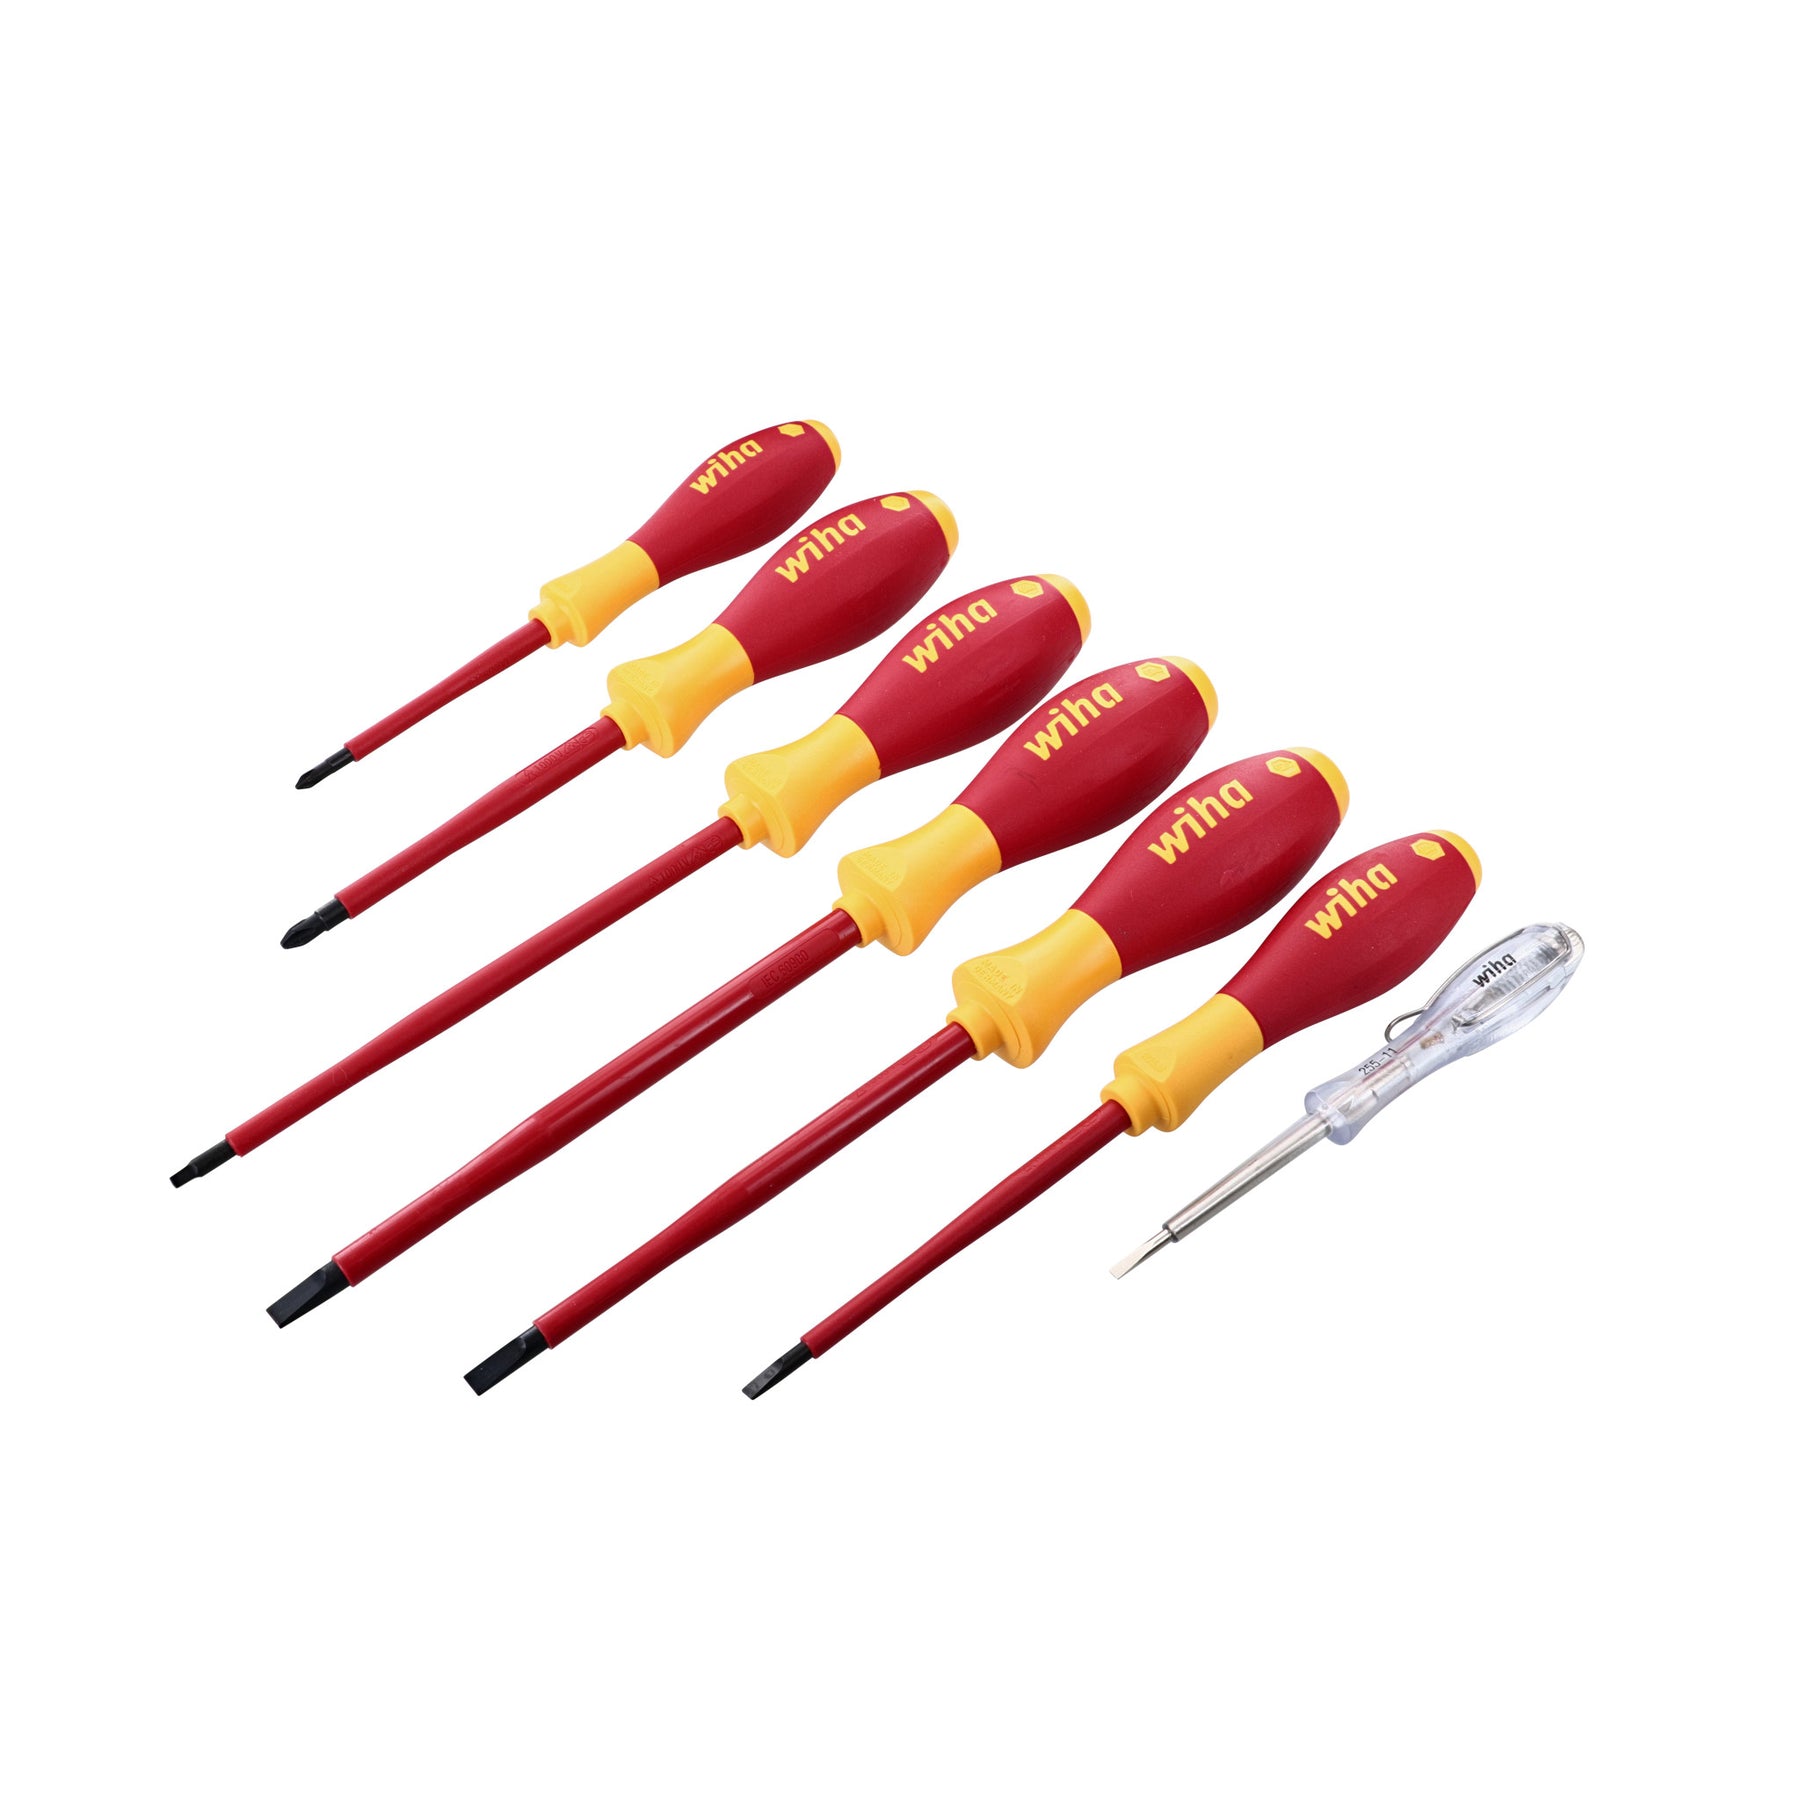 Wiha 32087 7 Piece Insulated SoftFinish Screwdriver and Voltage Detector Set